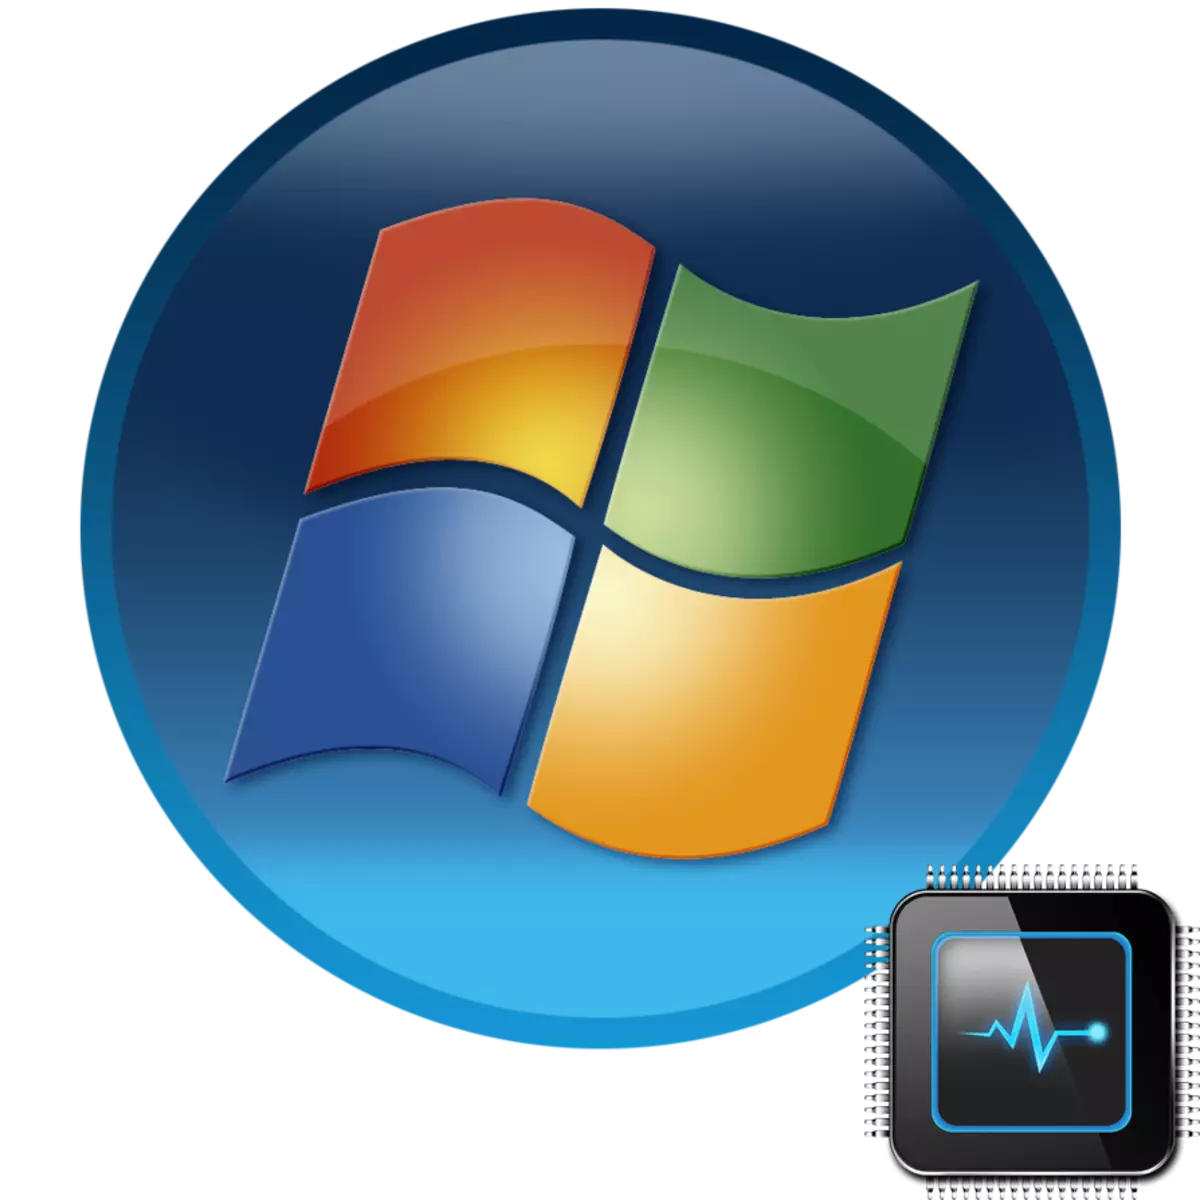 Inaction System in Windows 7